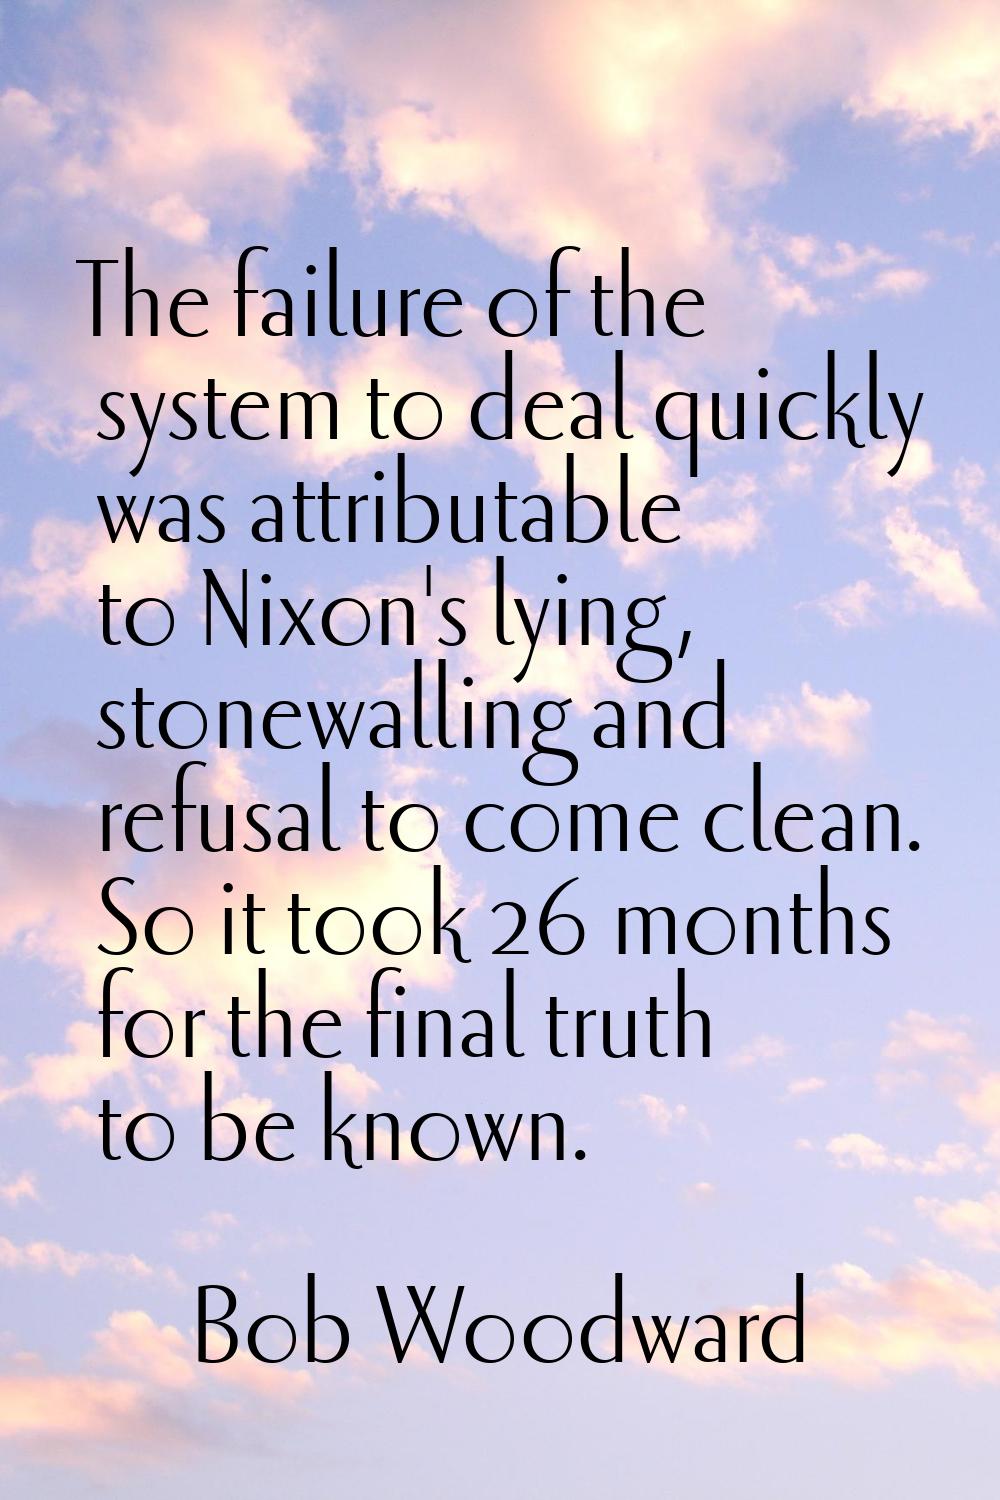 The failure of the system to deal quickly was attributable to Nixon's lying, stonewalling and refus